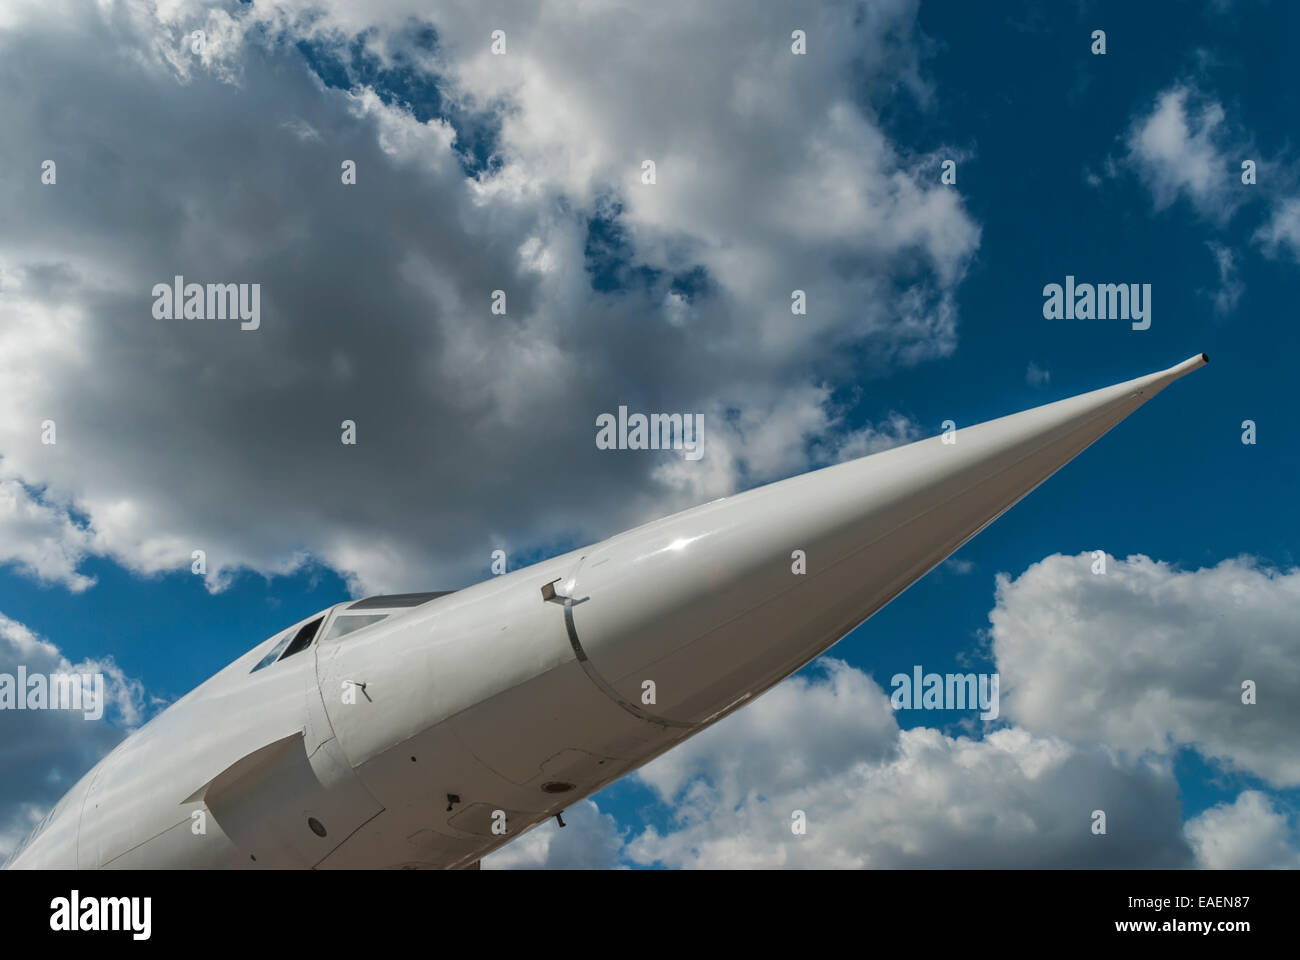 The nose of a supersonic airliner, Concorde, against a blue sky with white clouds Stock Photo